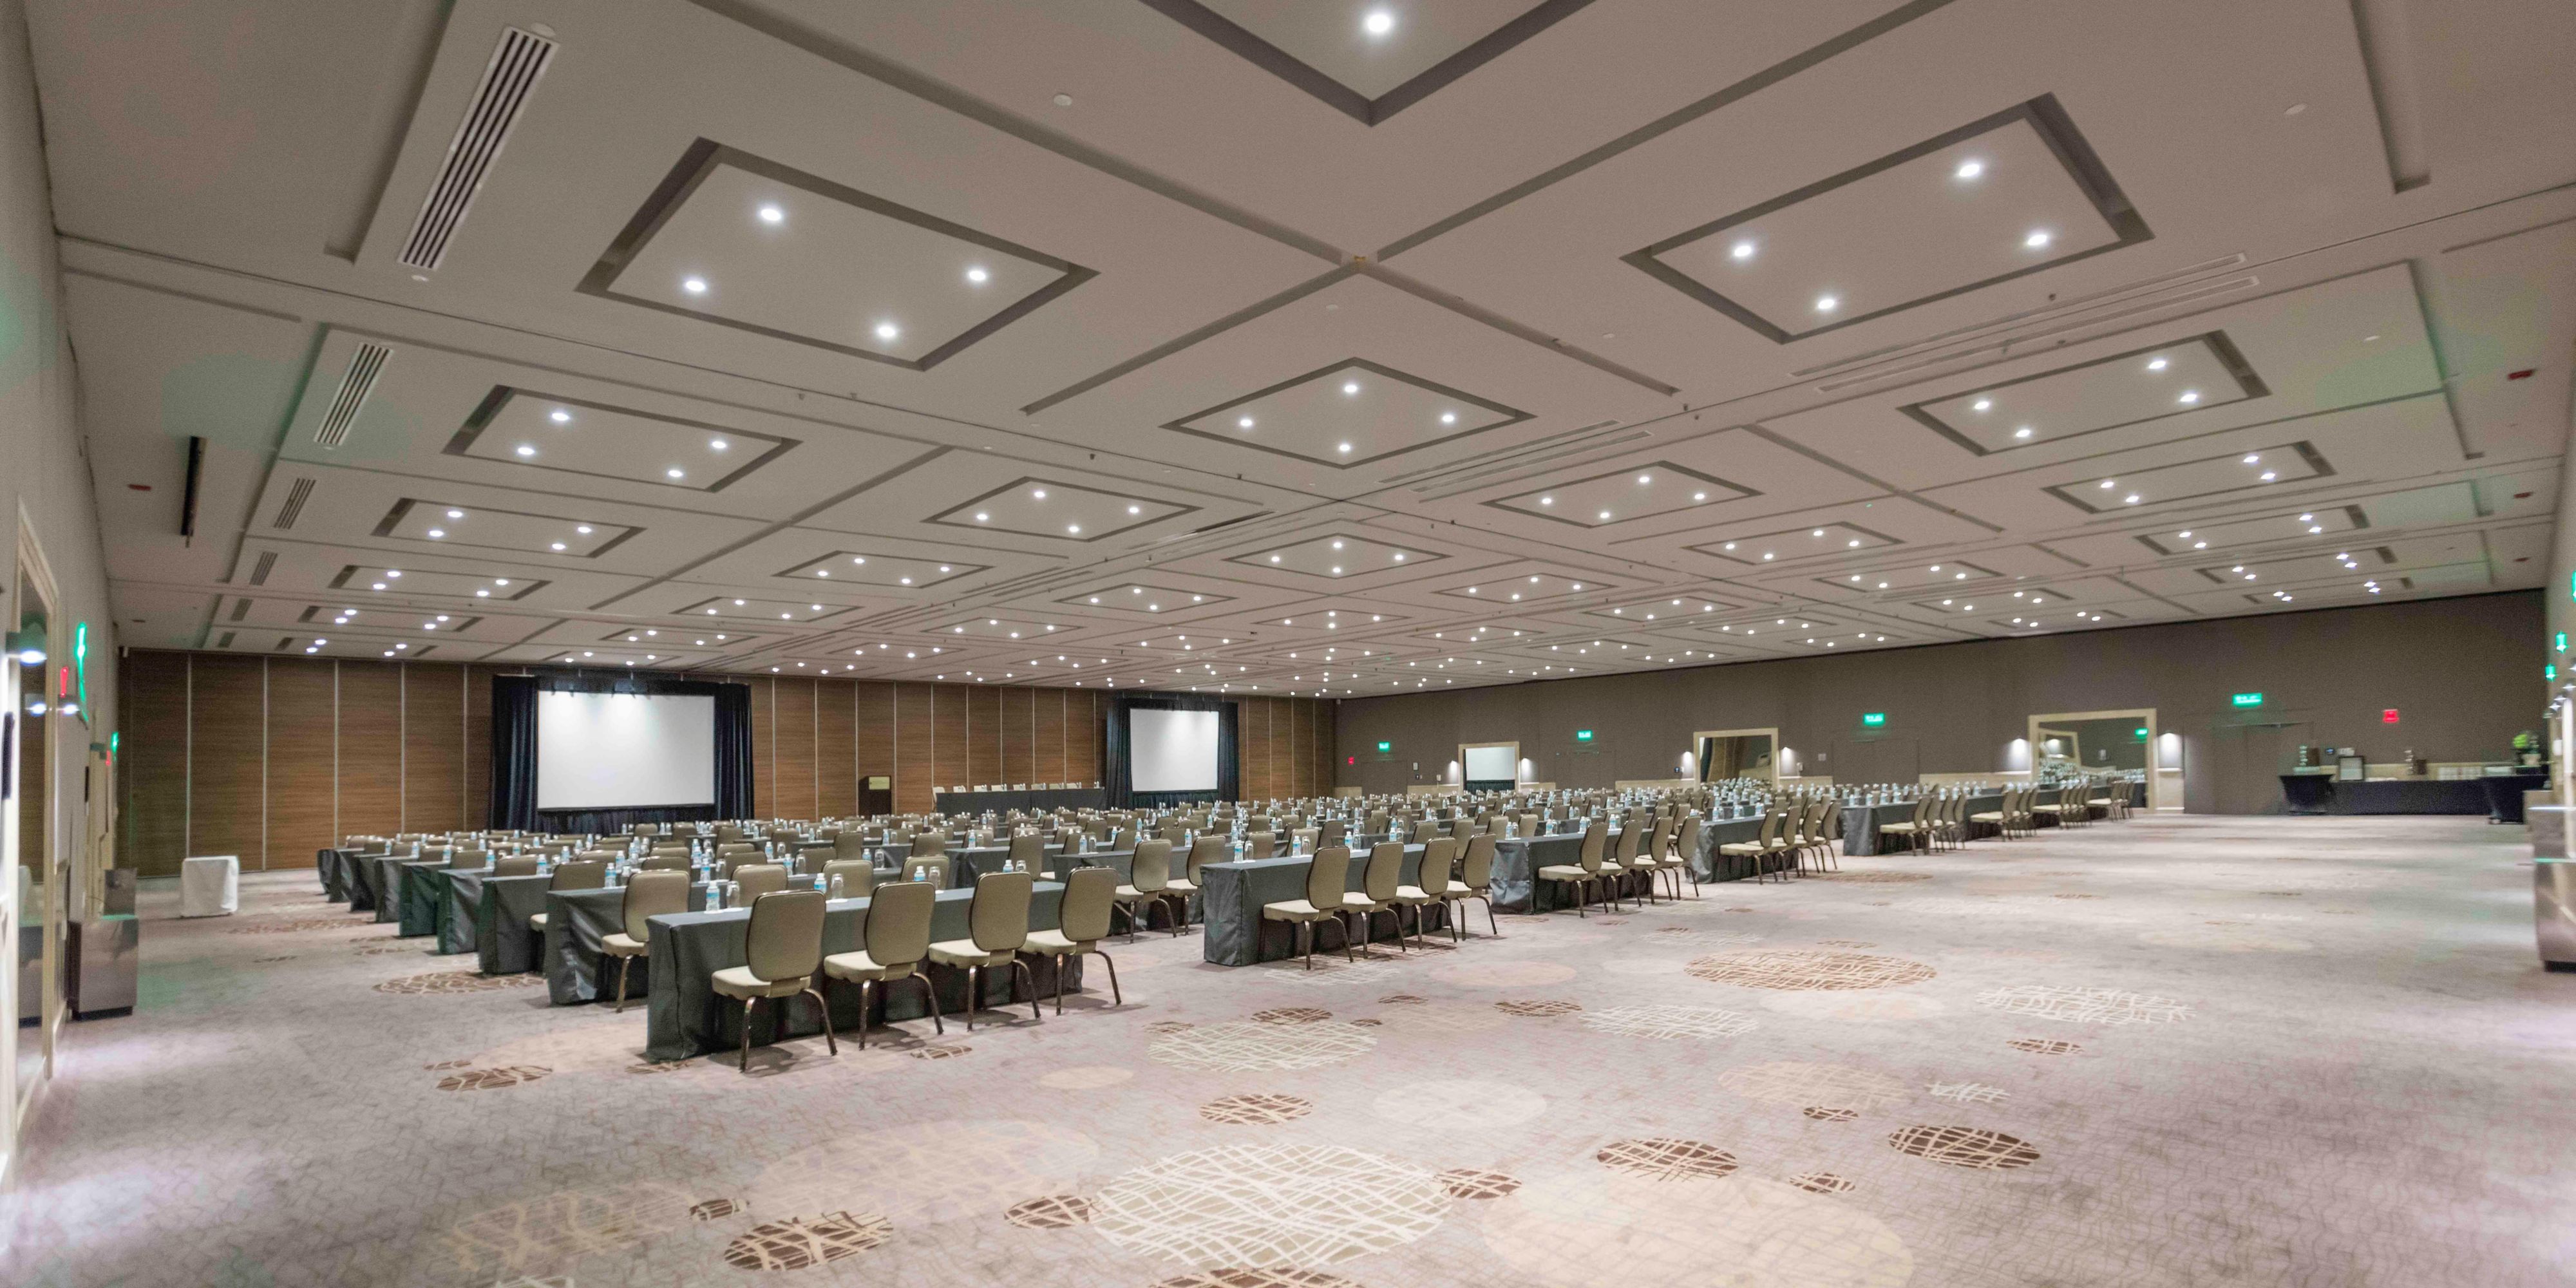 Looking for event venues? We offer 13 meeting rooms with a maximum capacity of 1,200 in auditorium layout and a Business Center with 6 conference rooms. InterContinental Presdiente Mexico City is the perfect venue for weddings, conferences or any other celebration.